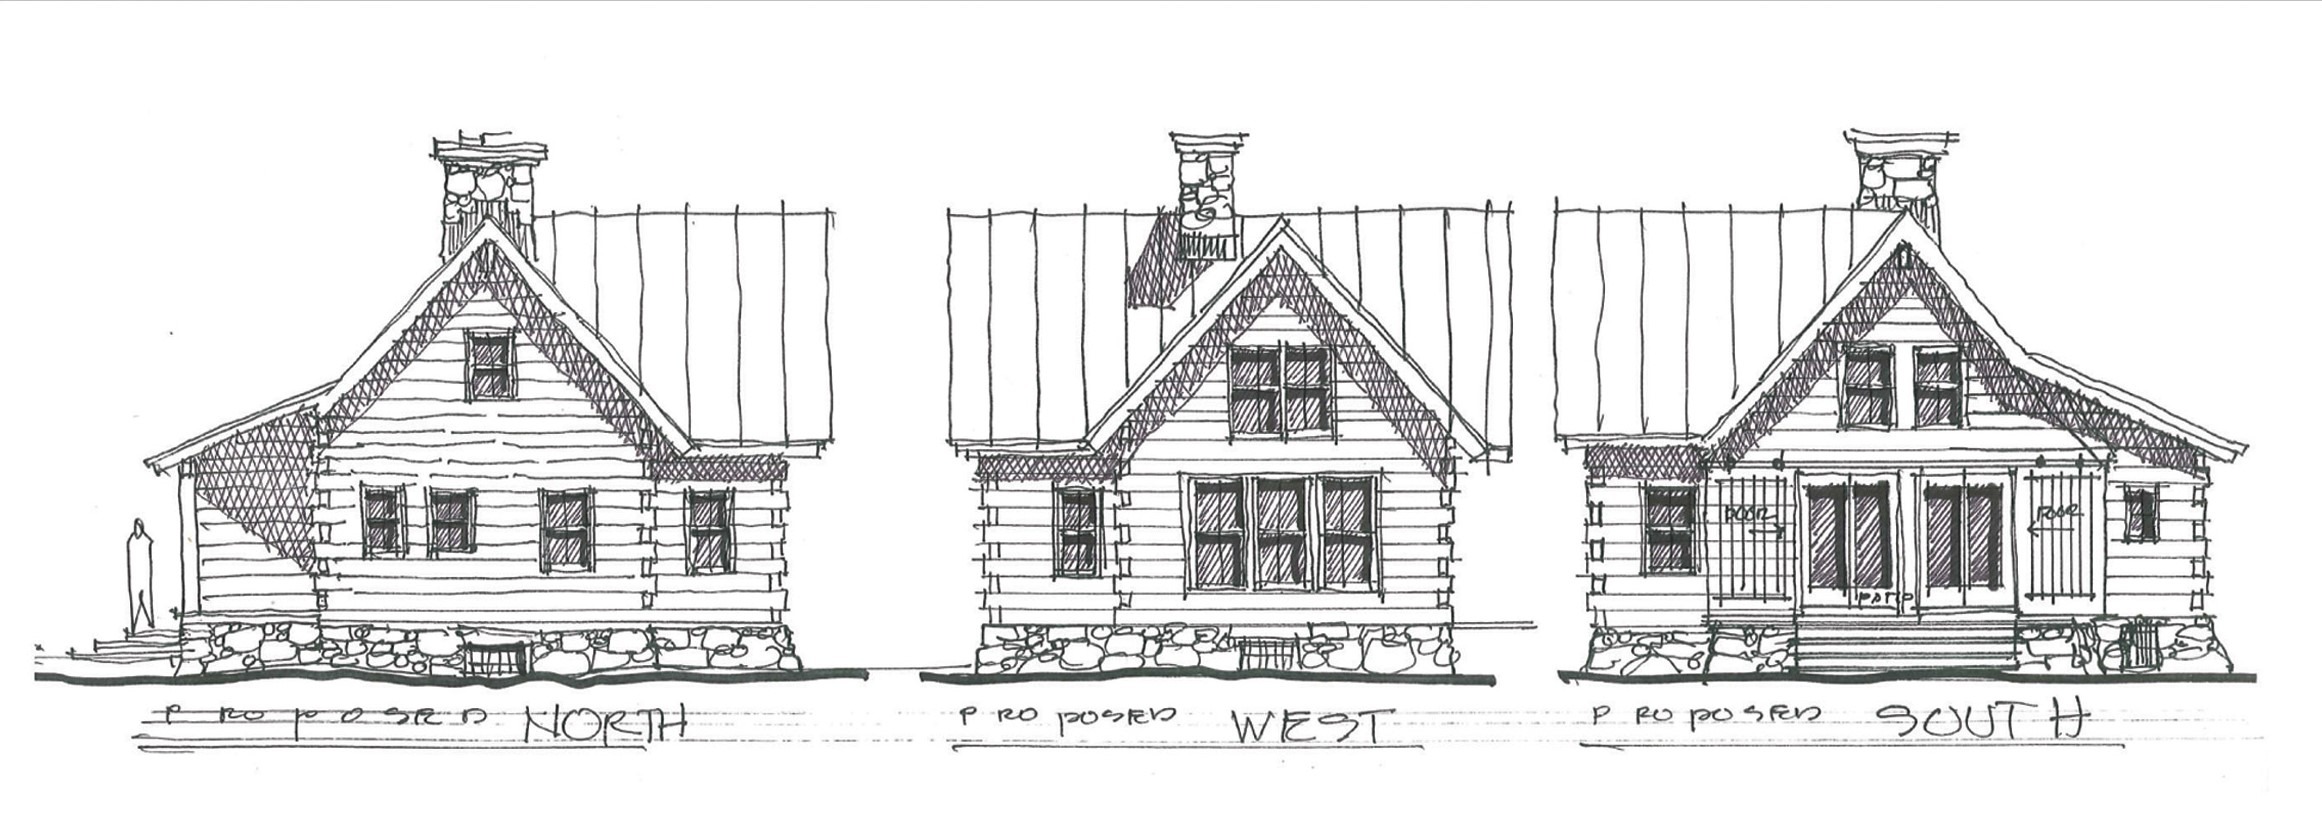 Planning a Log Home: The Program